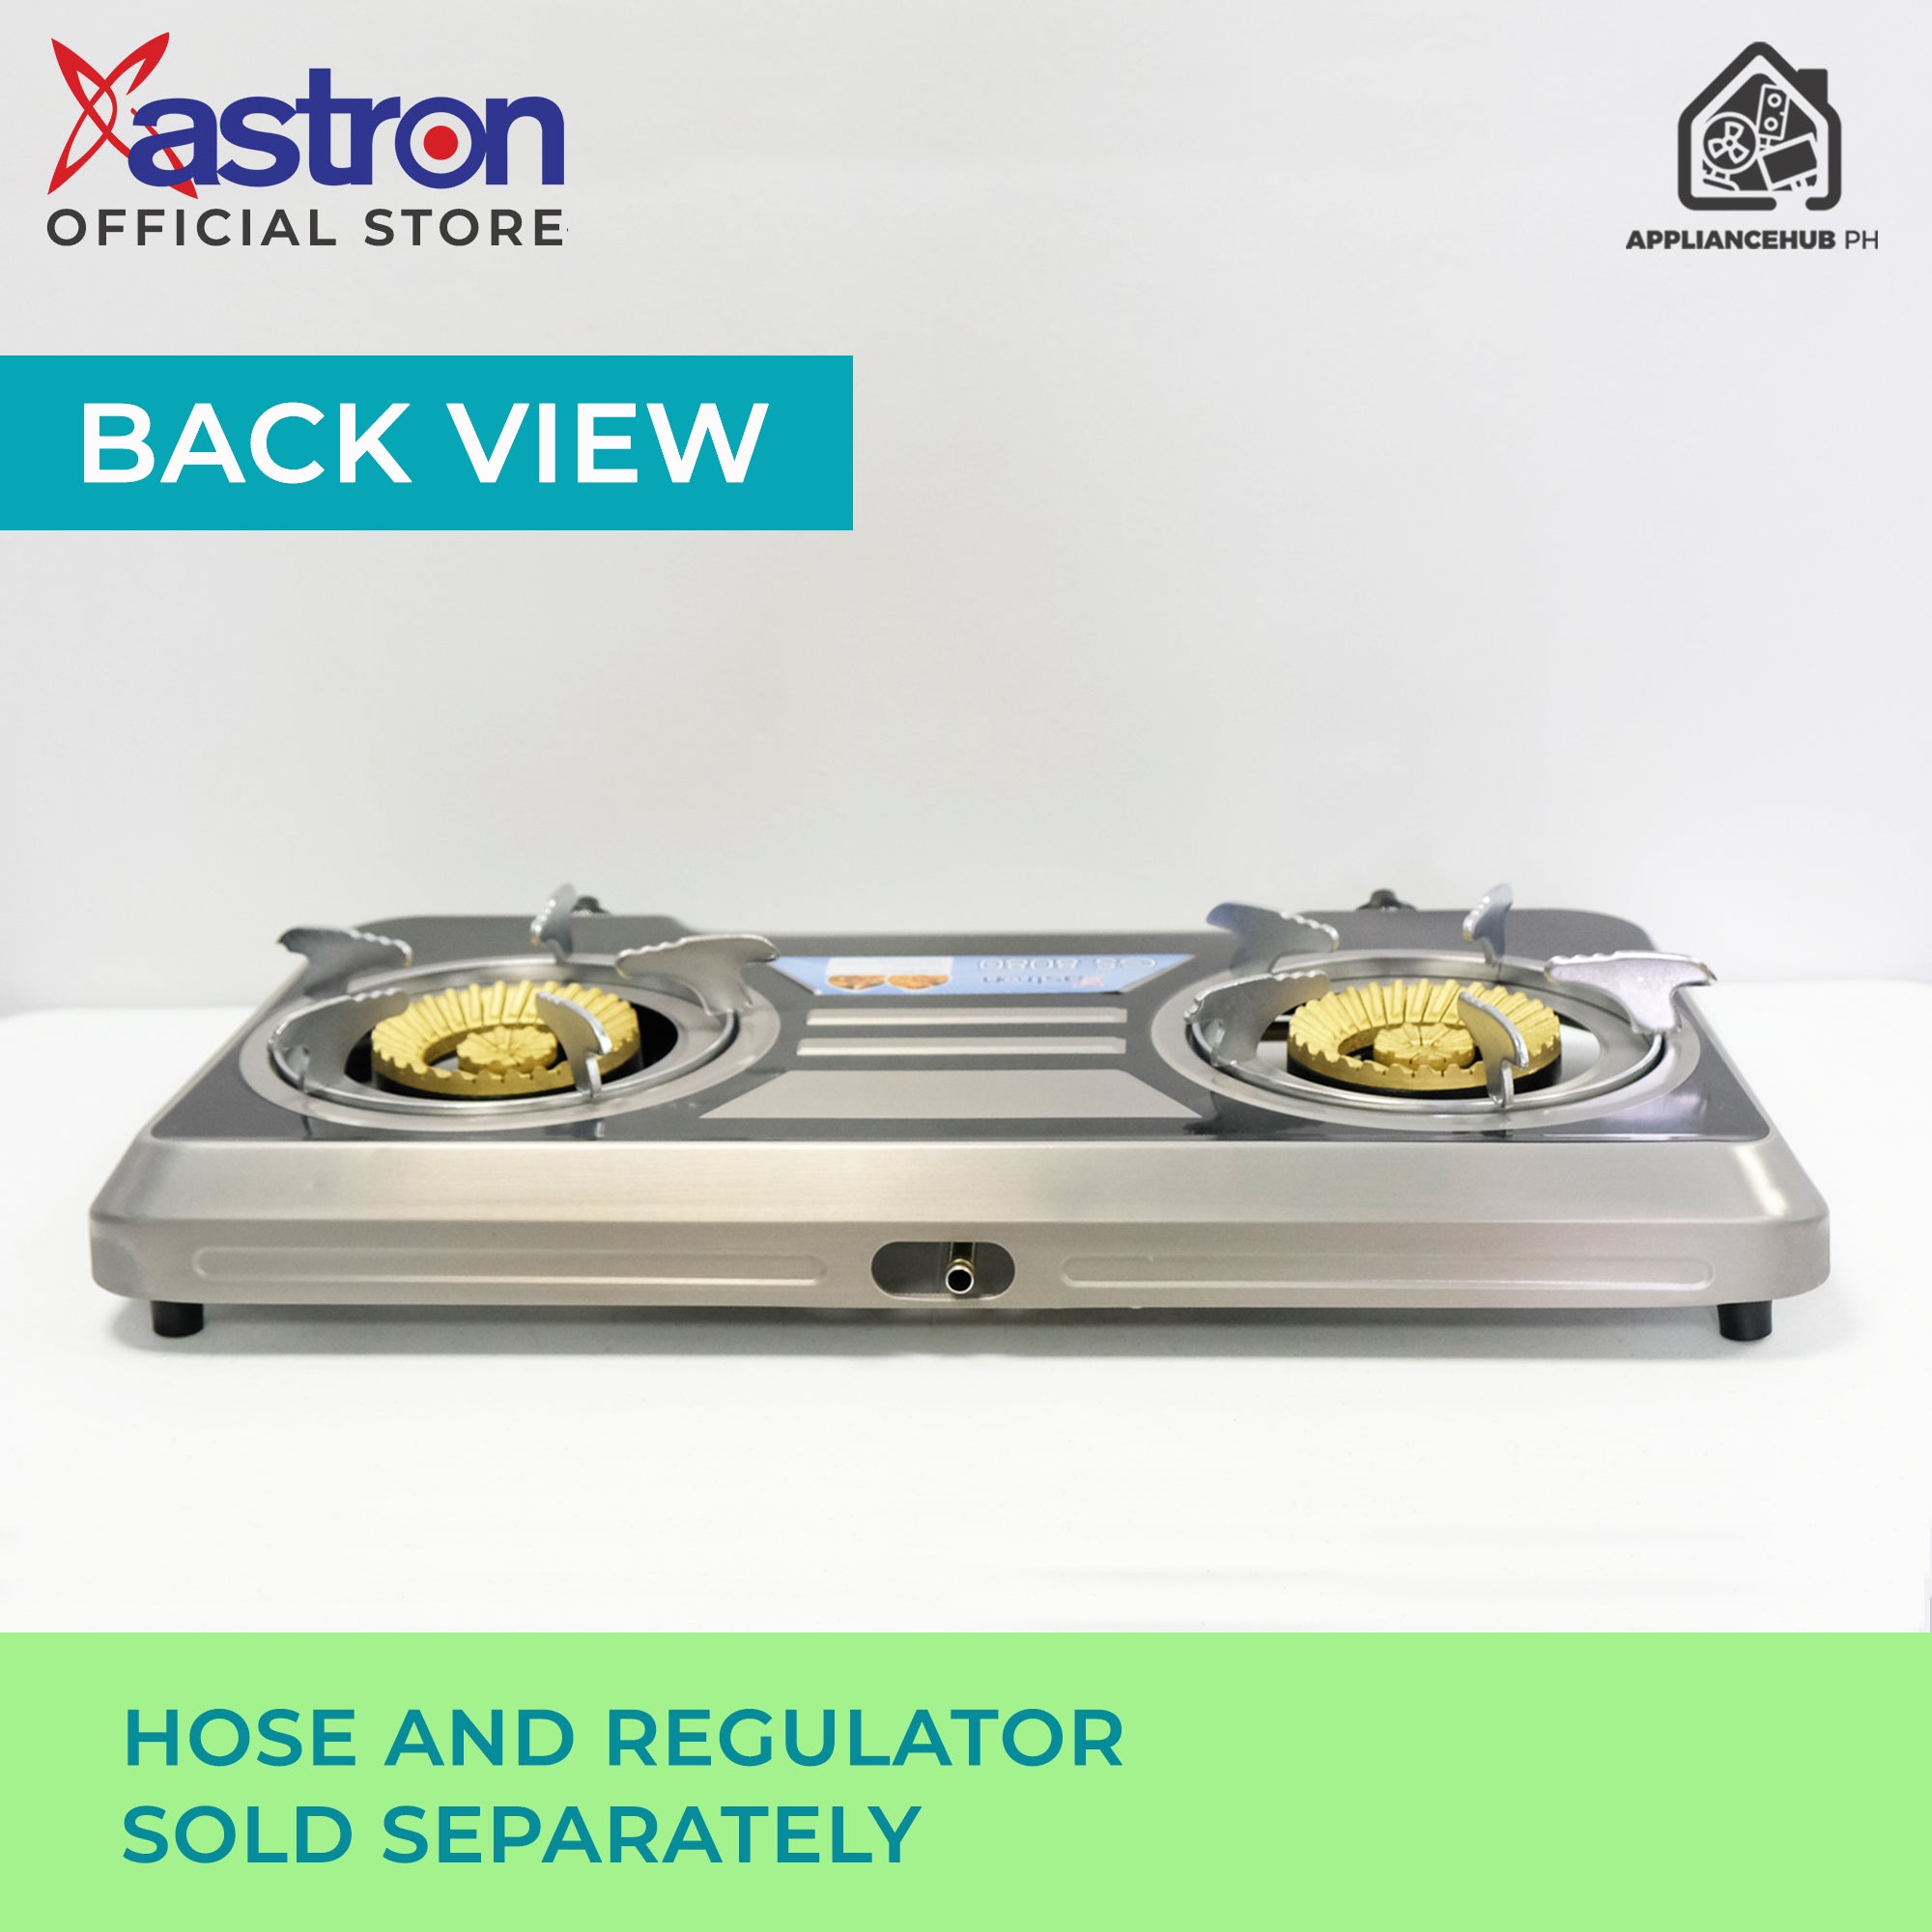 ASTRON GS-8080 Heavy Duty Cast Iron Double Burner Gas Stove Stainless Steel Body Astron